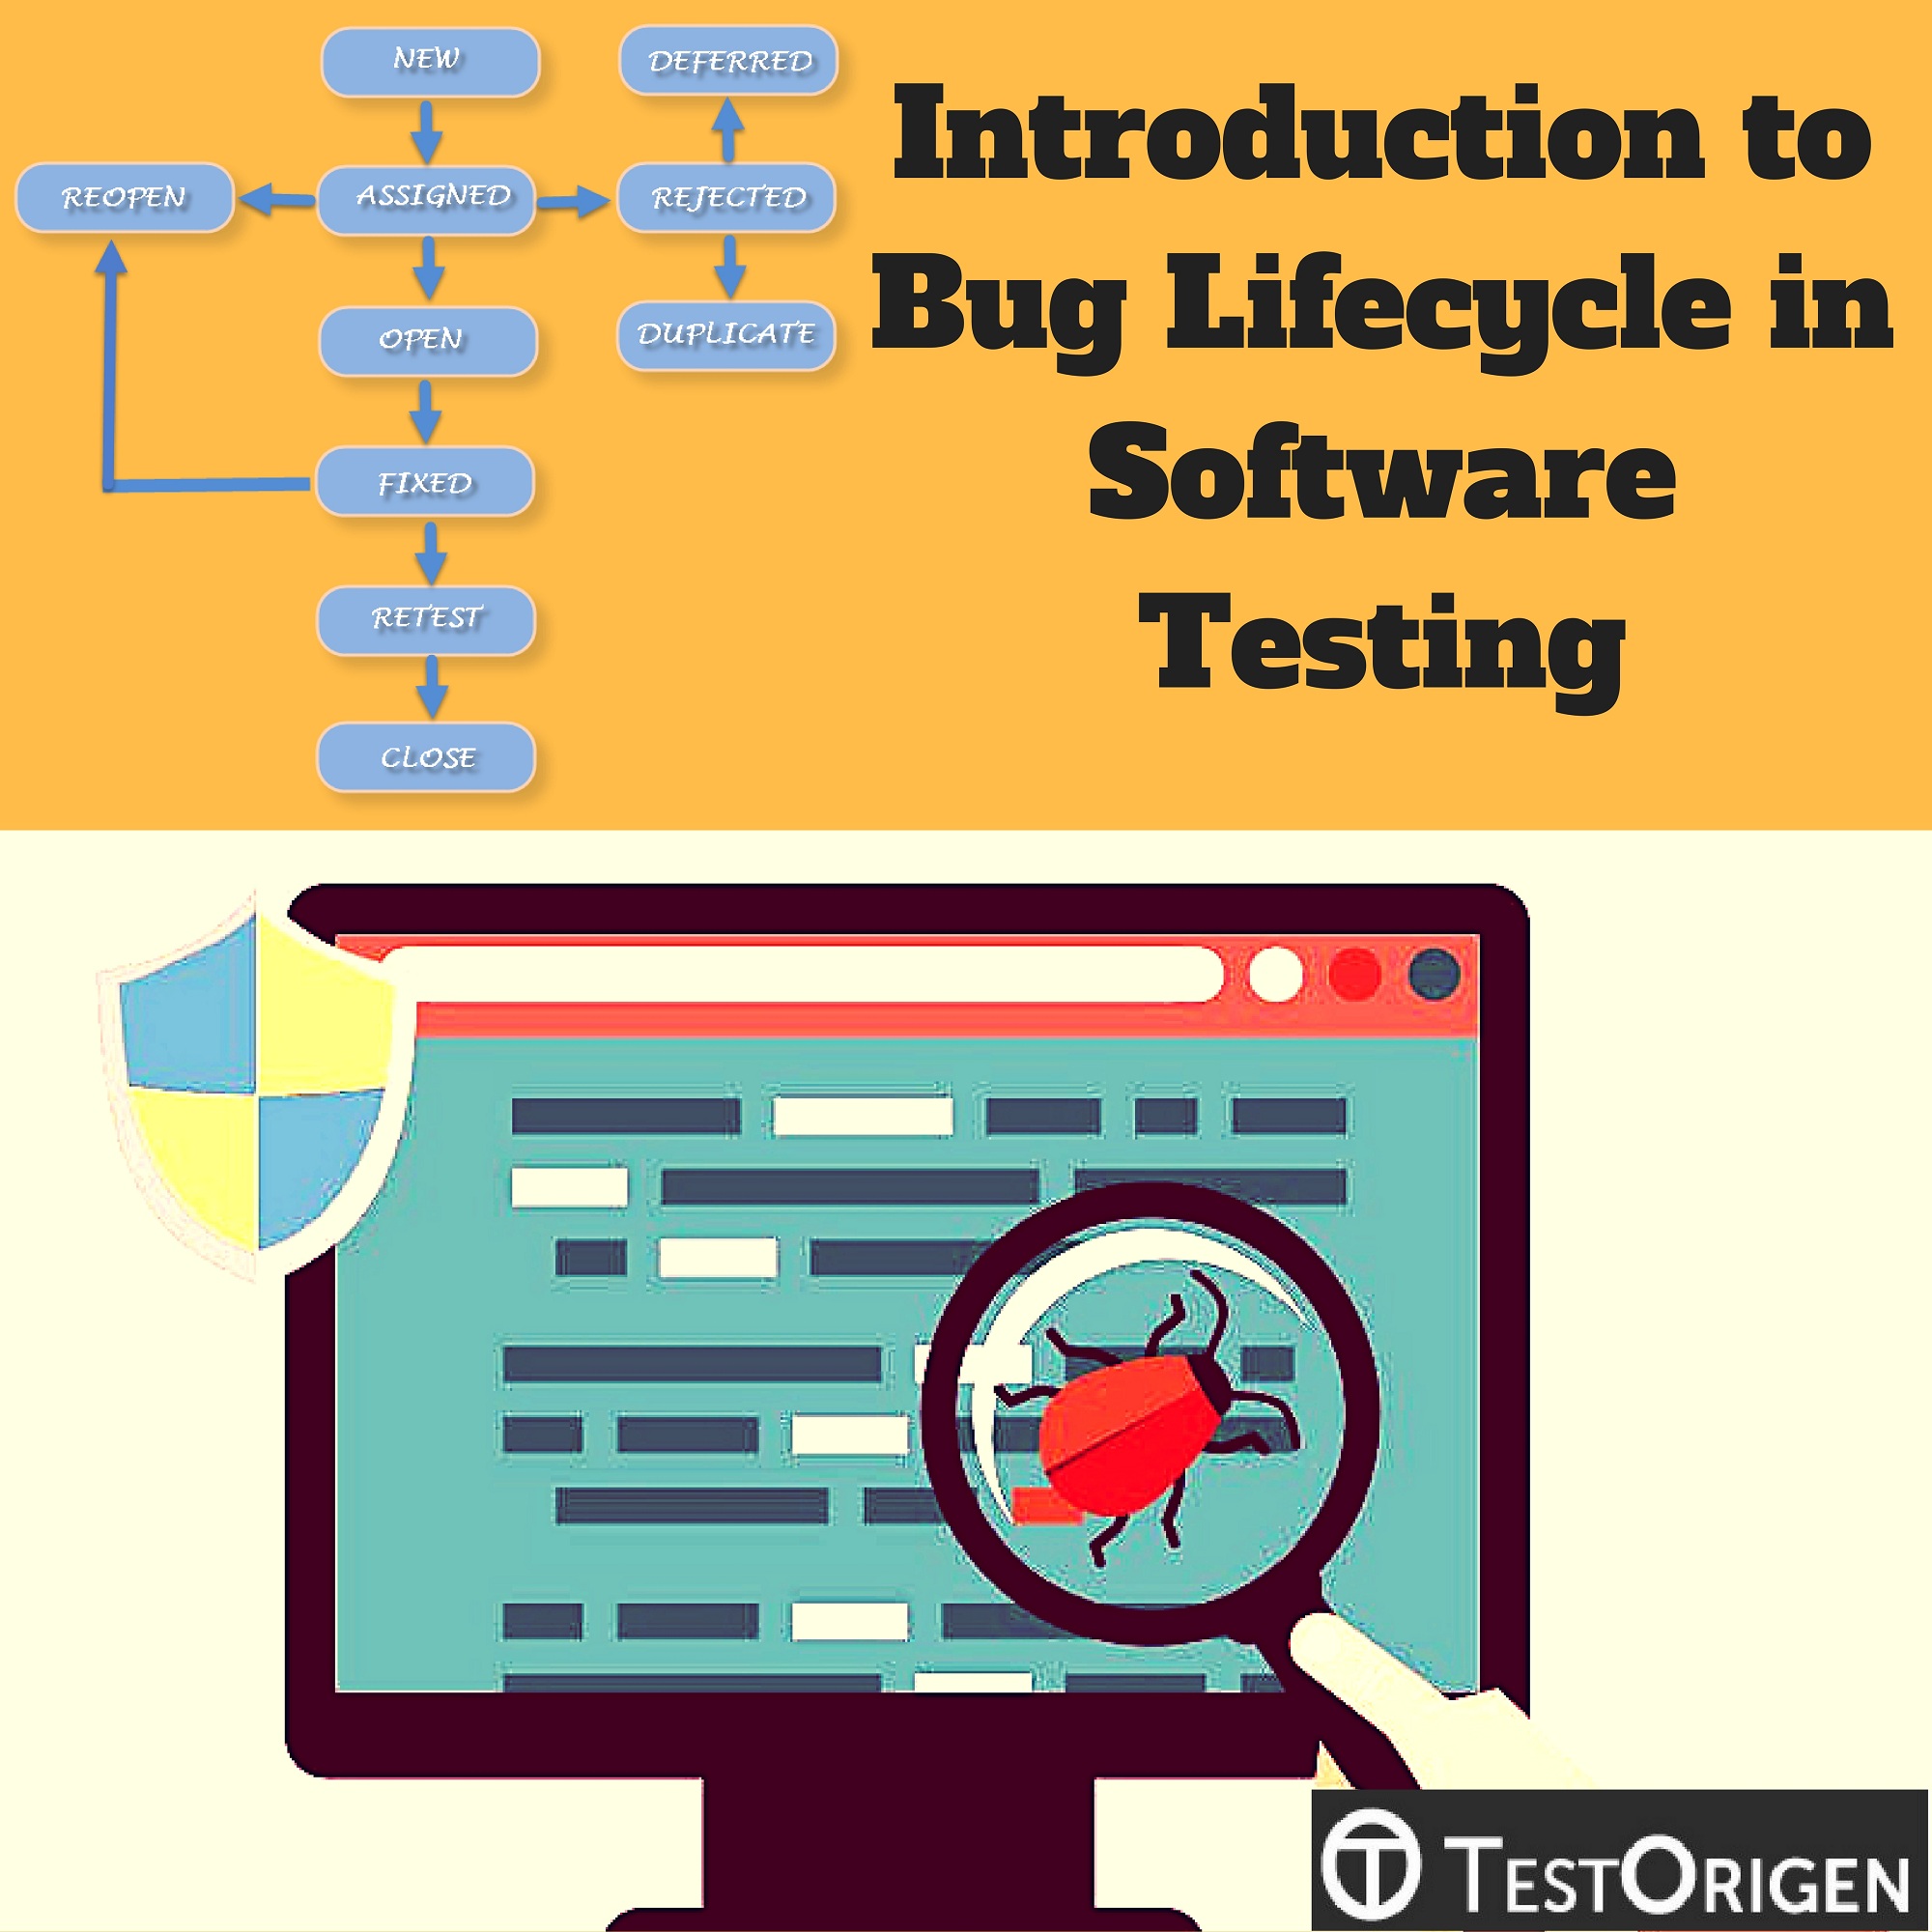 Introduction to Bug Lifecycle in Software Testing